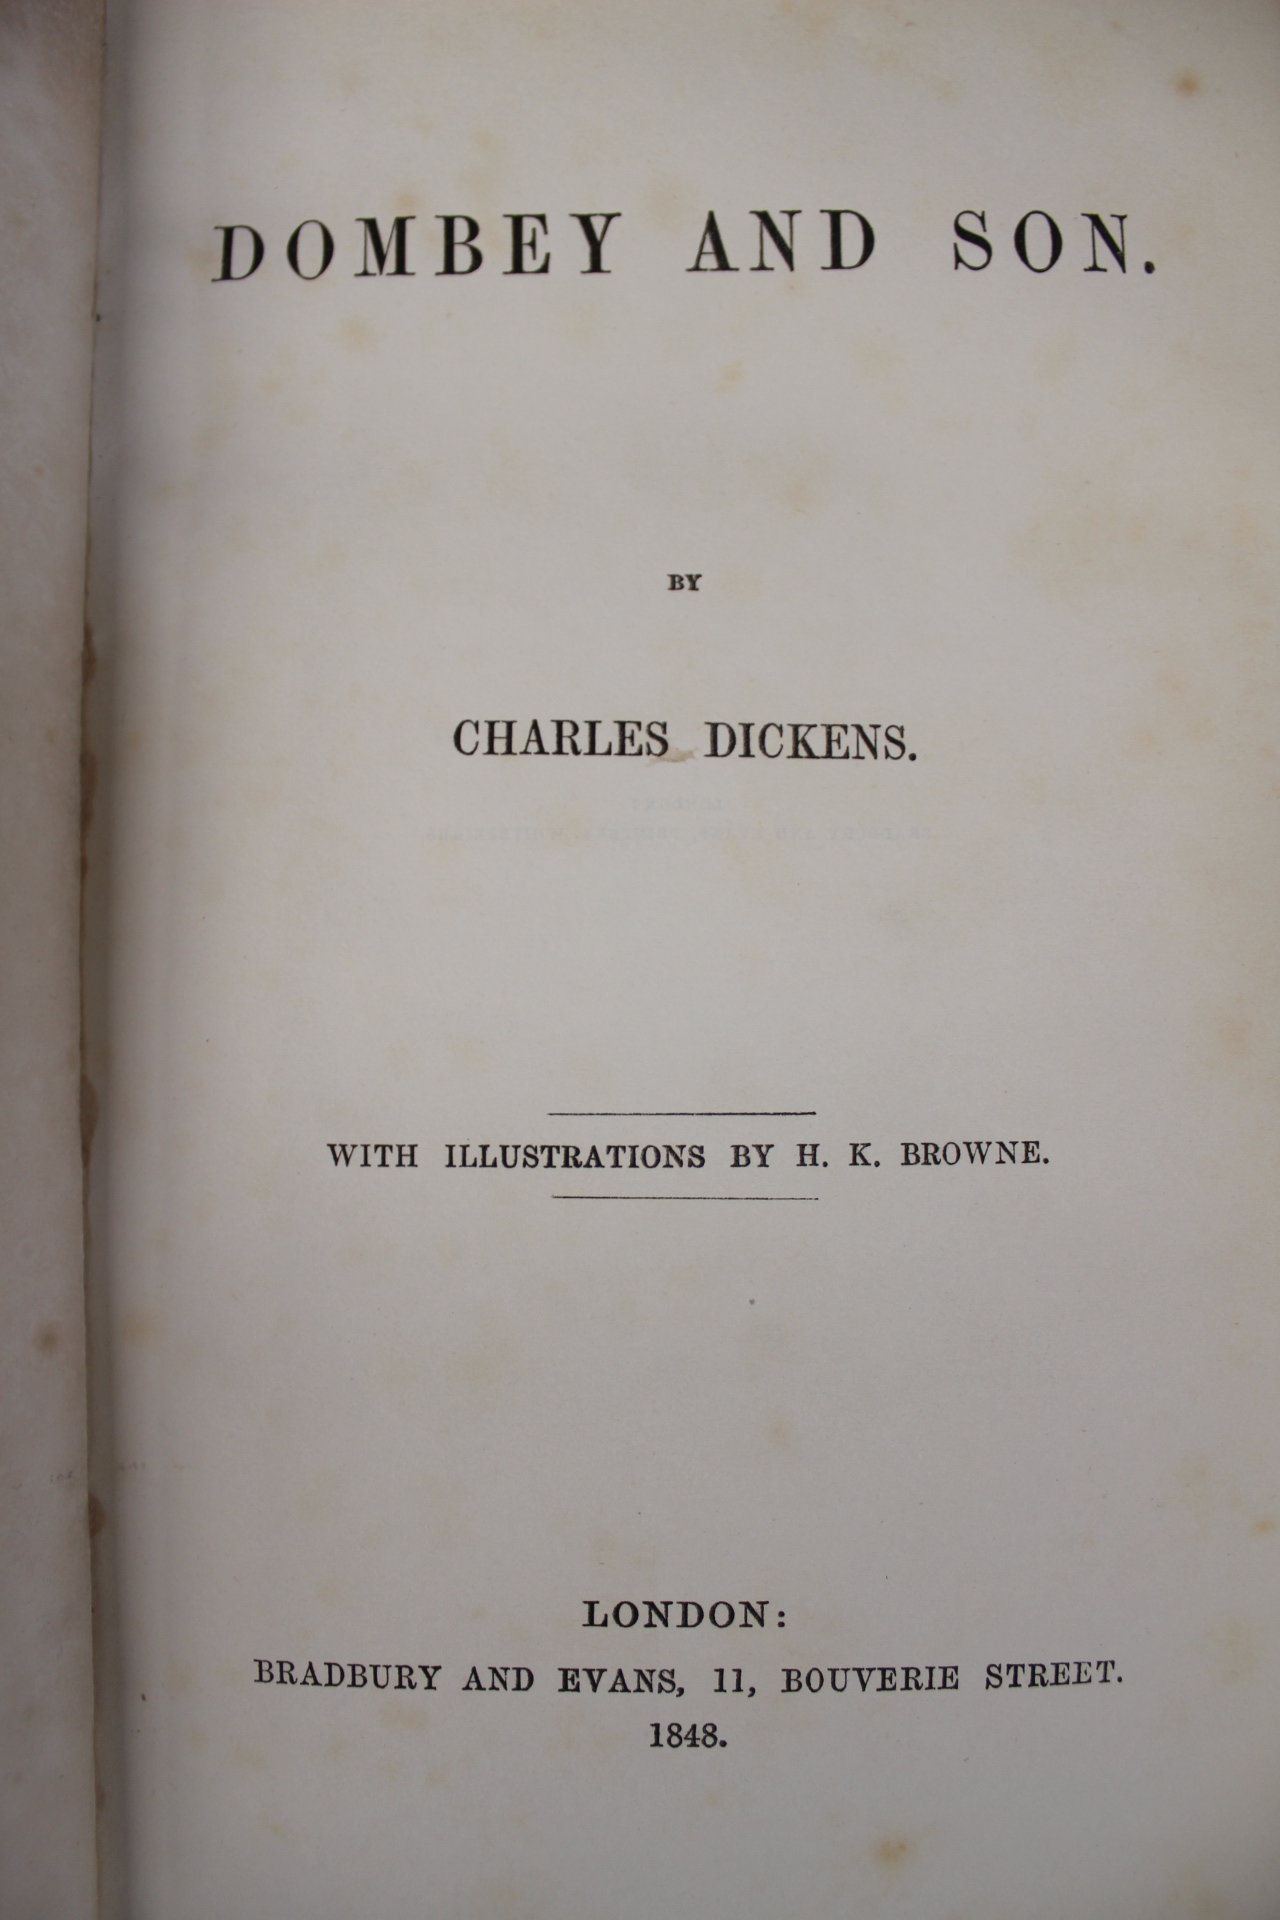 Dickens (Charles), first editions: 'Dombey and Son', London: Bradbury & Evans, 1848, octavo, - Image 5 of 5